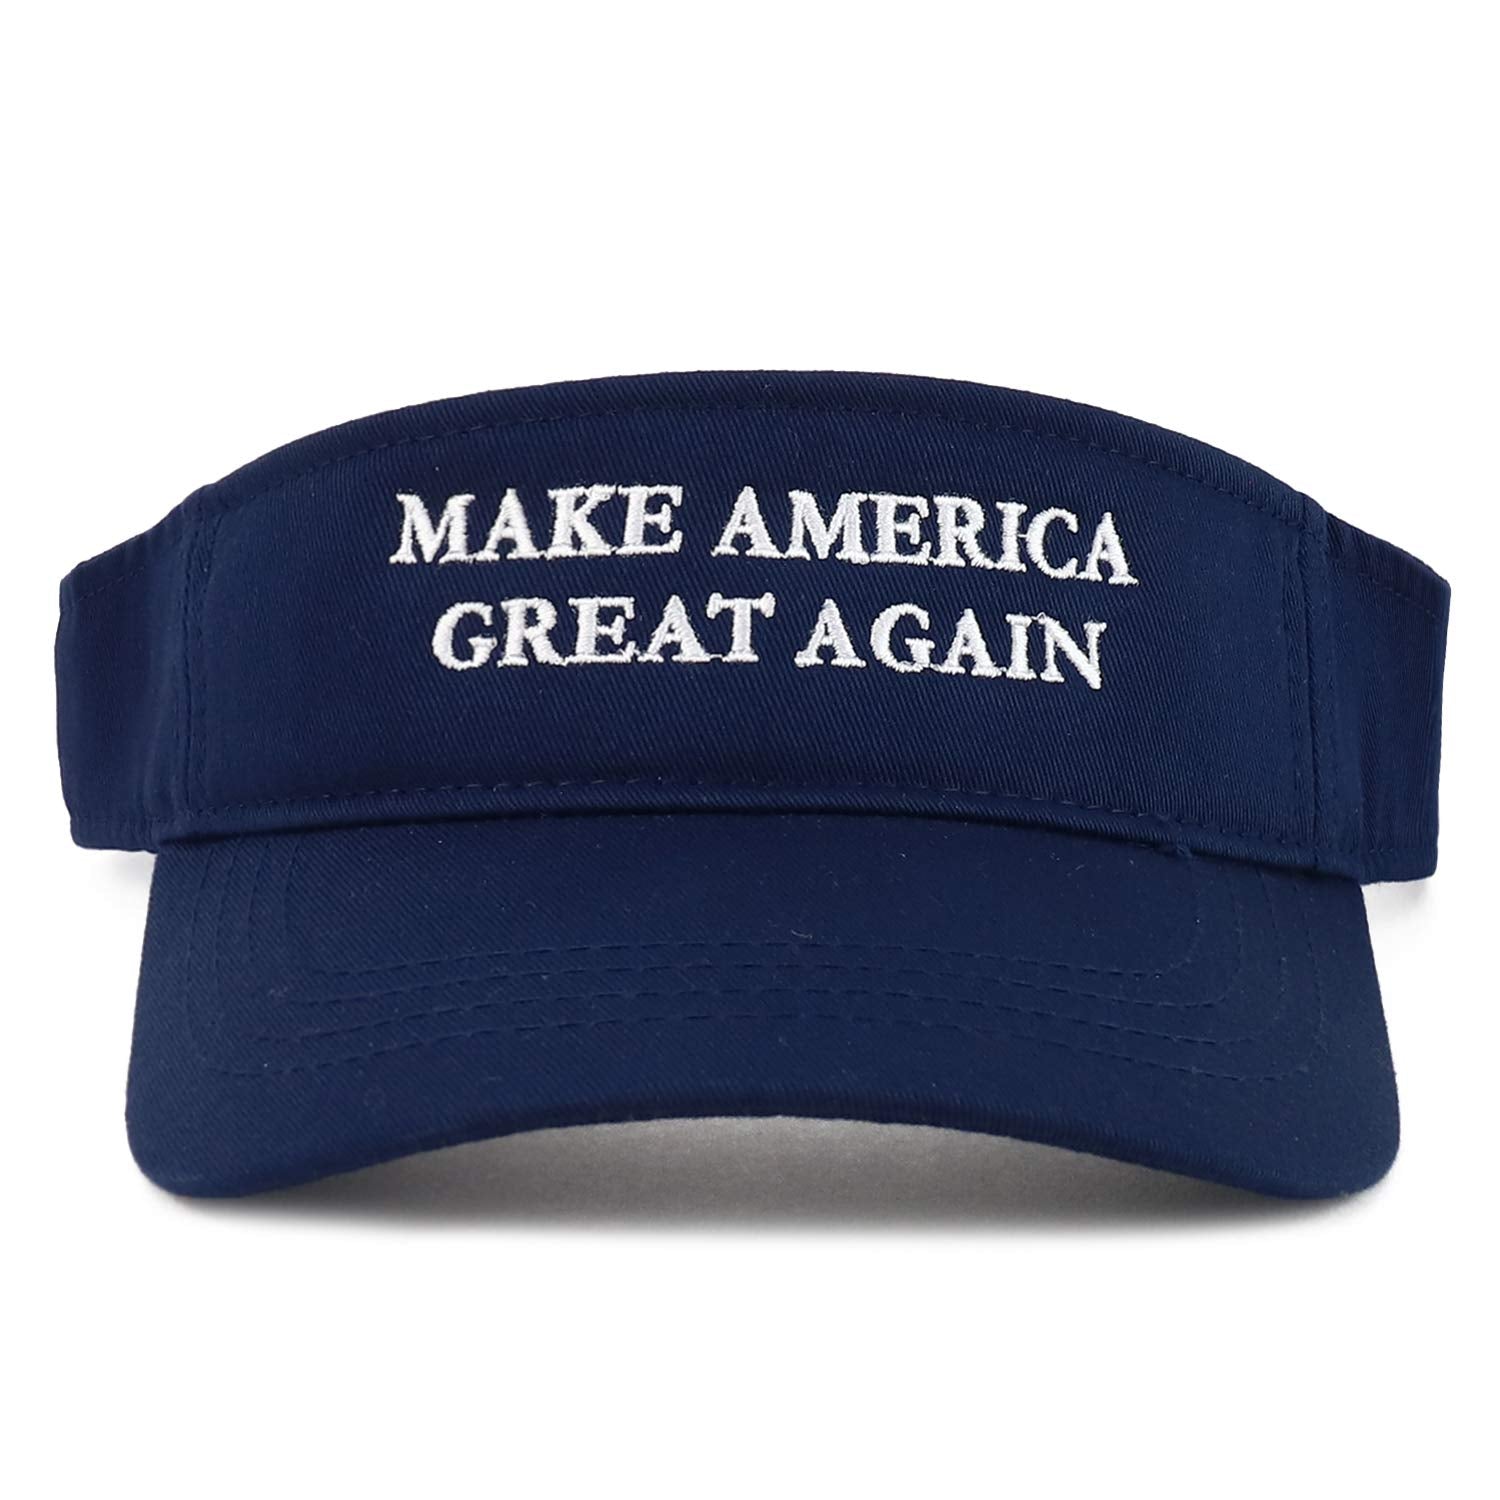 Donald Trump Visor, Make America Great Again - Quality Embroidered 100% Cotton (One Size, Navy)